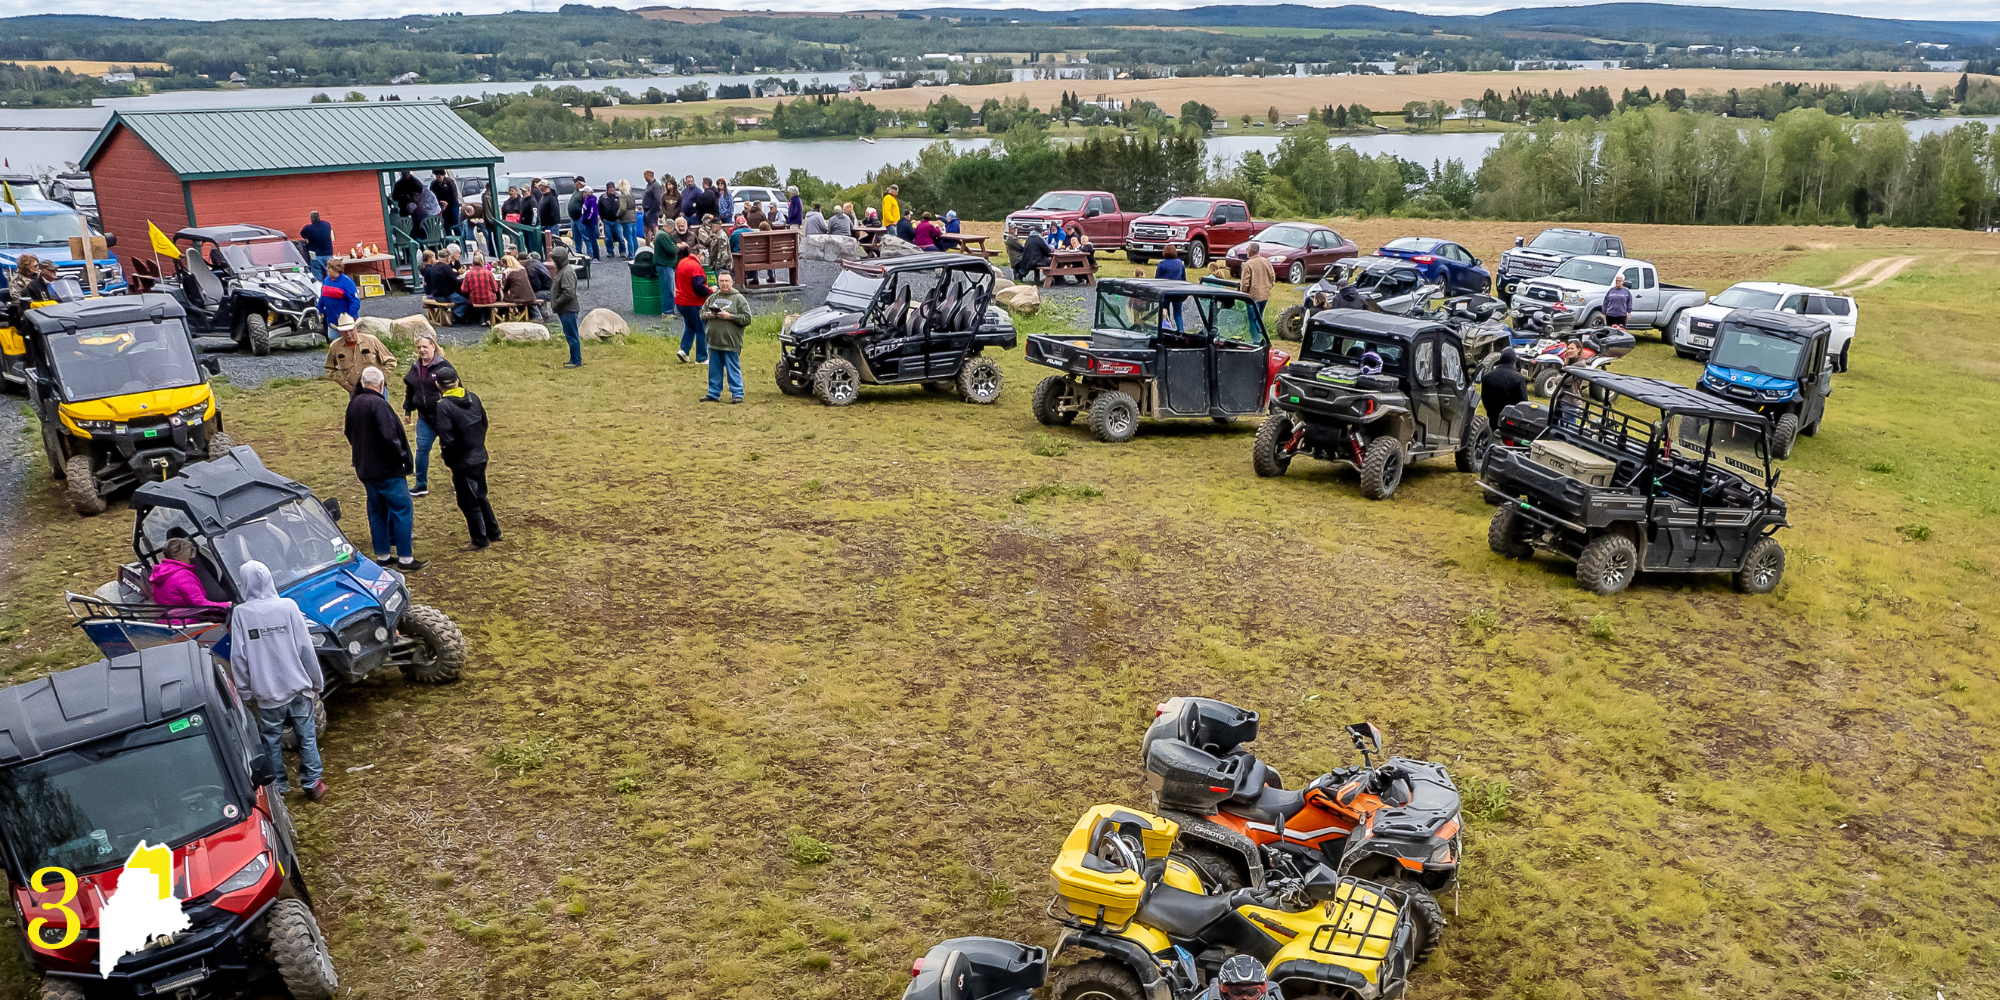 1,300 miles of ATV trails make it the best trail system in New England. PC Aroostook Unmanned Ariel Services